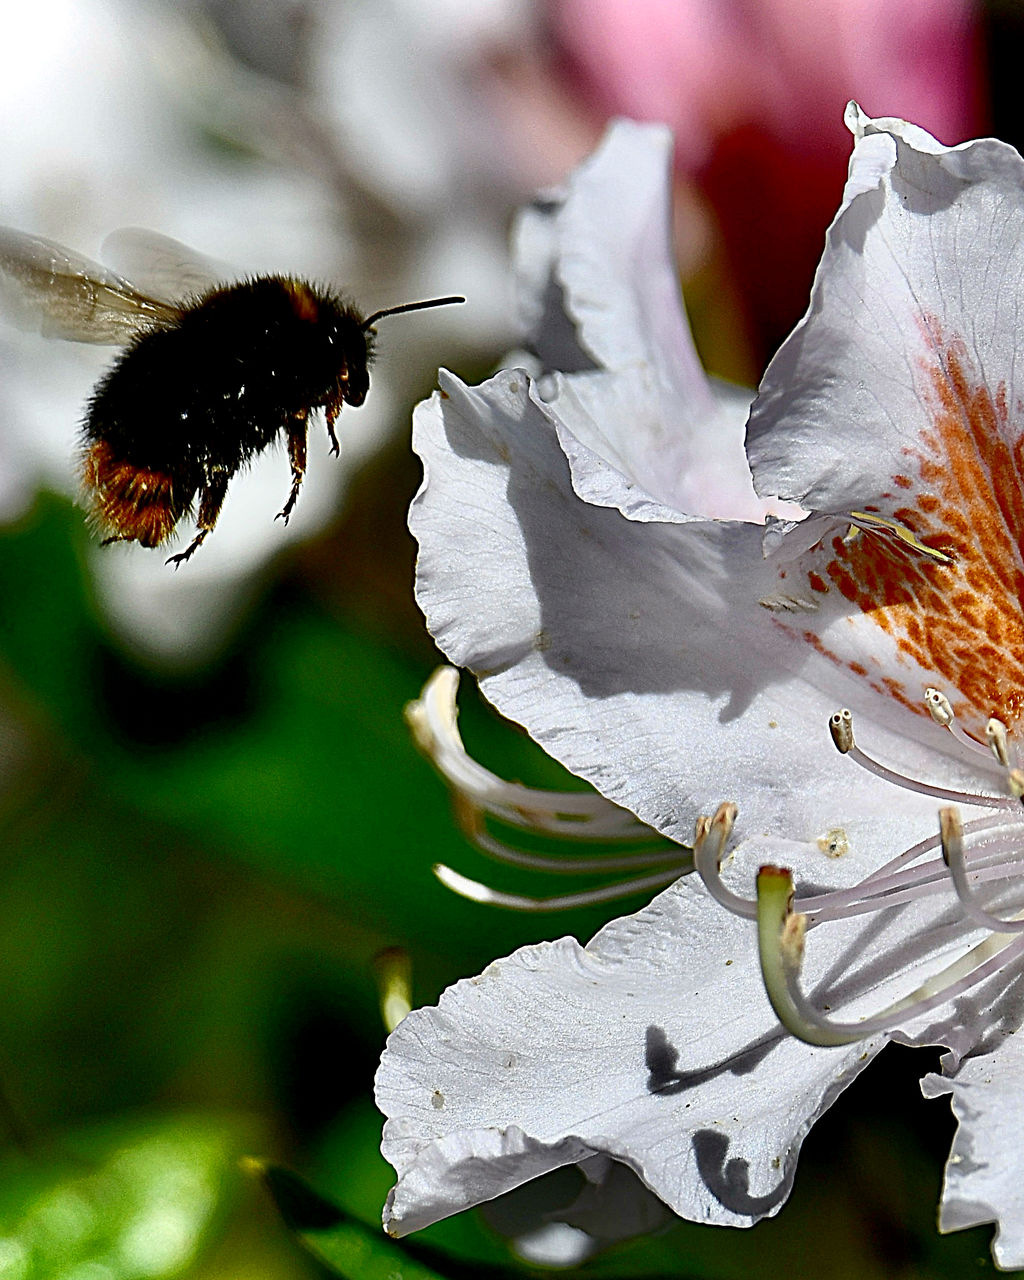 flower, animal, close-up, animal themes, animal wildlife, insect, nature, macro photography, beauty in nature, plant, wildlife, one animal, flowering plant, petal, blossom, fragility, leaf, no people, animal wing, freshness, flower head, focus on foreground, bee, flying, outdoors, animal body part, white